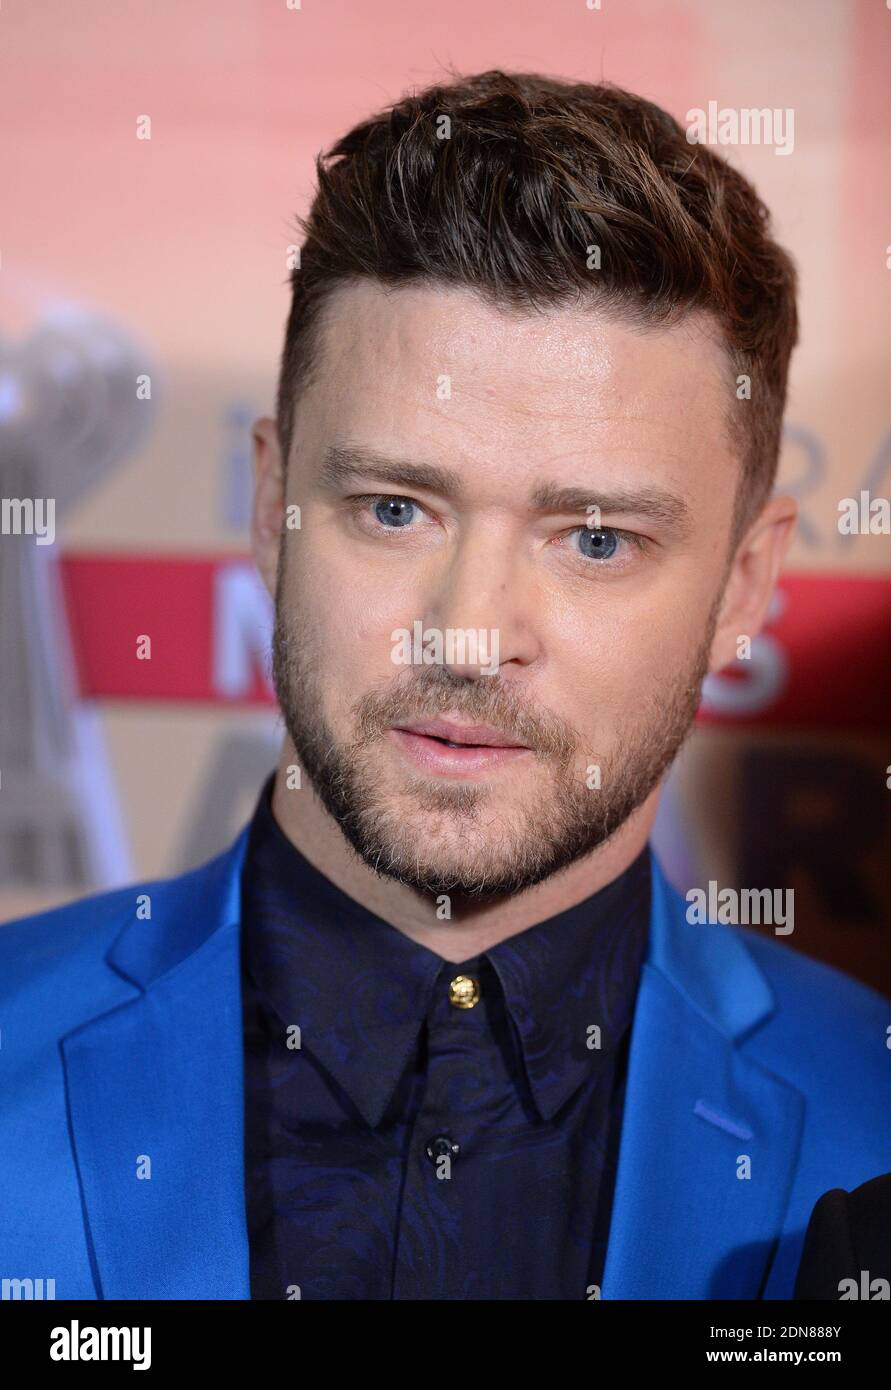 Justin Timberlake poses in the press room during the iHeartRadio Music  Awards held at The Shrine